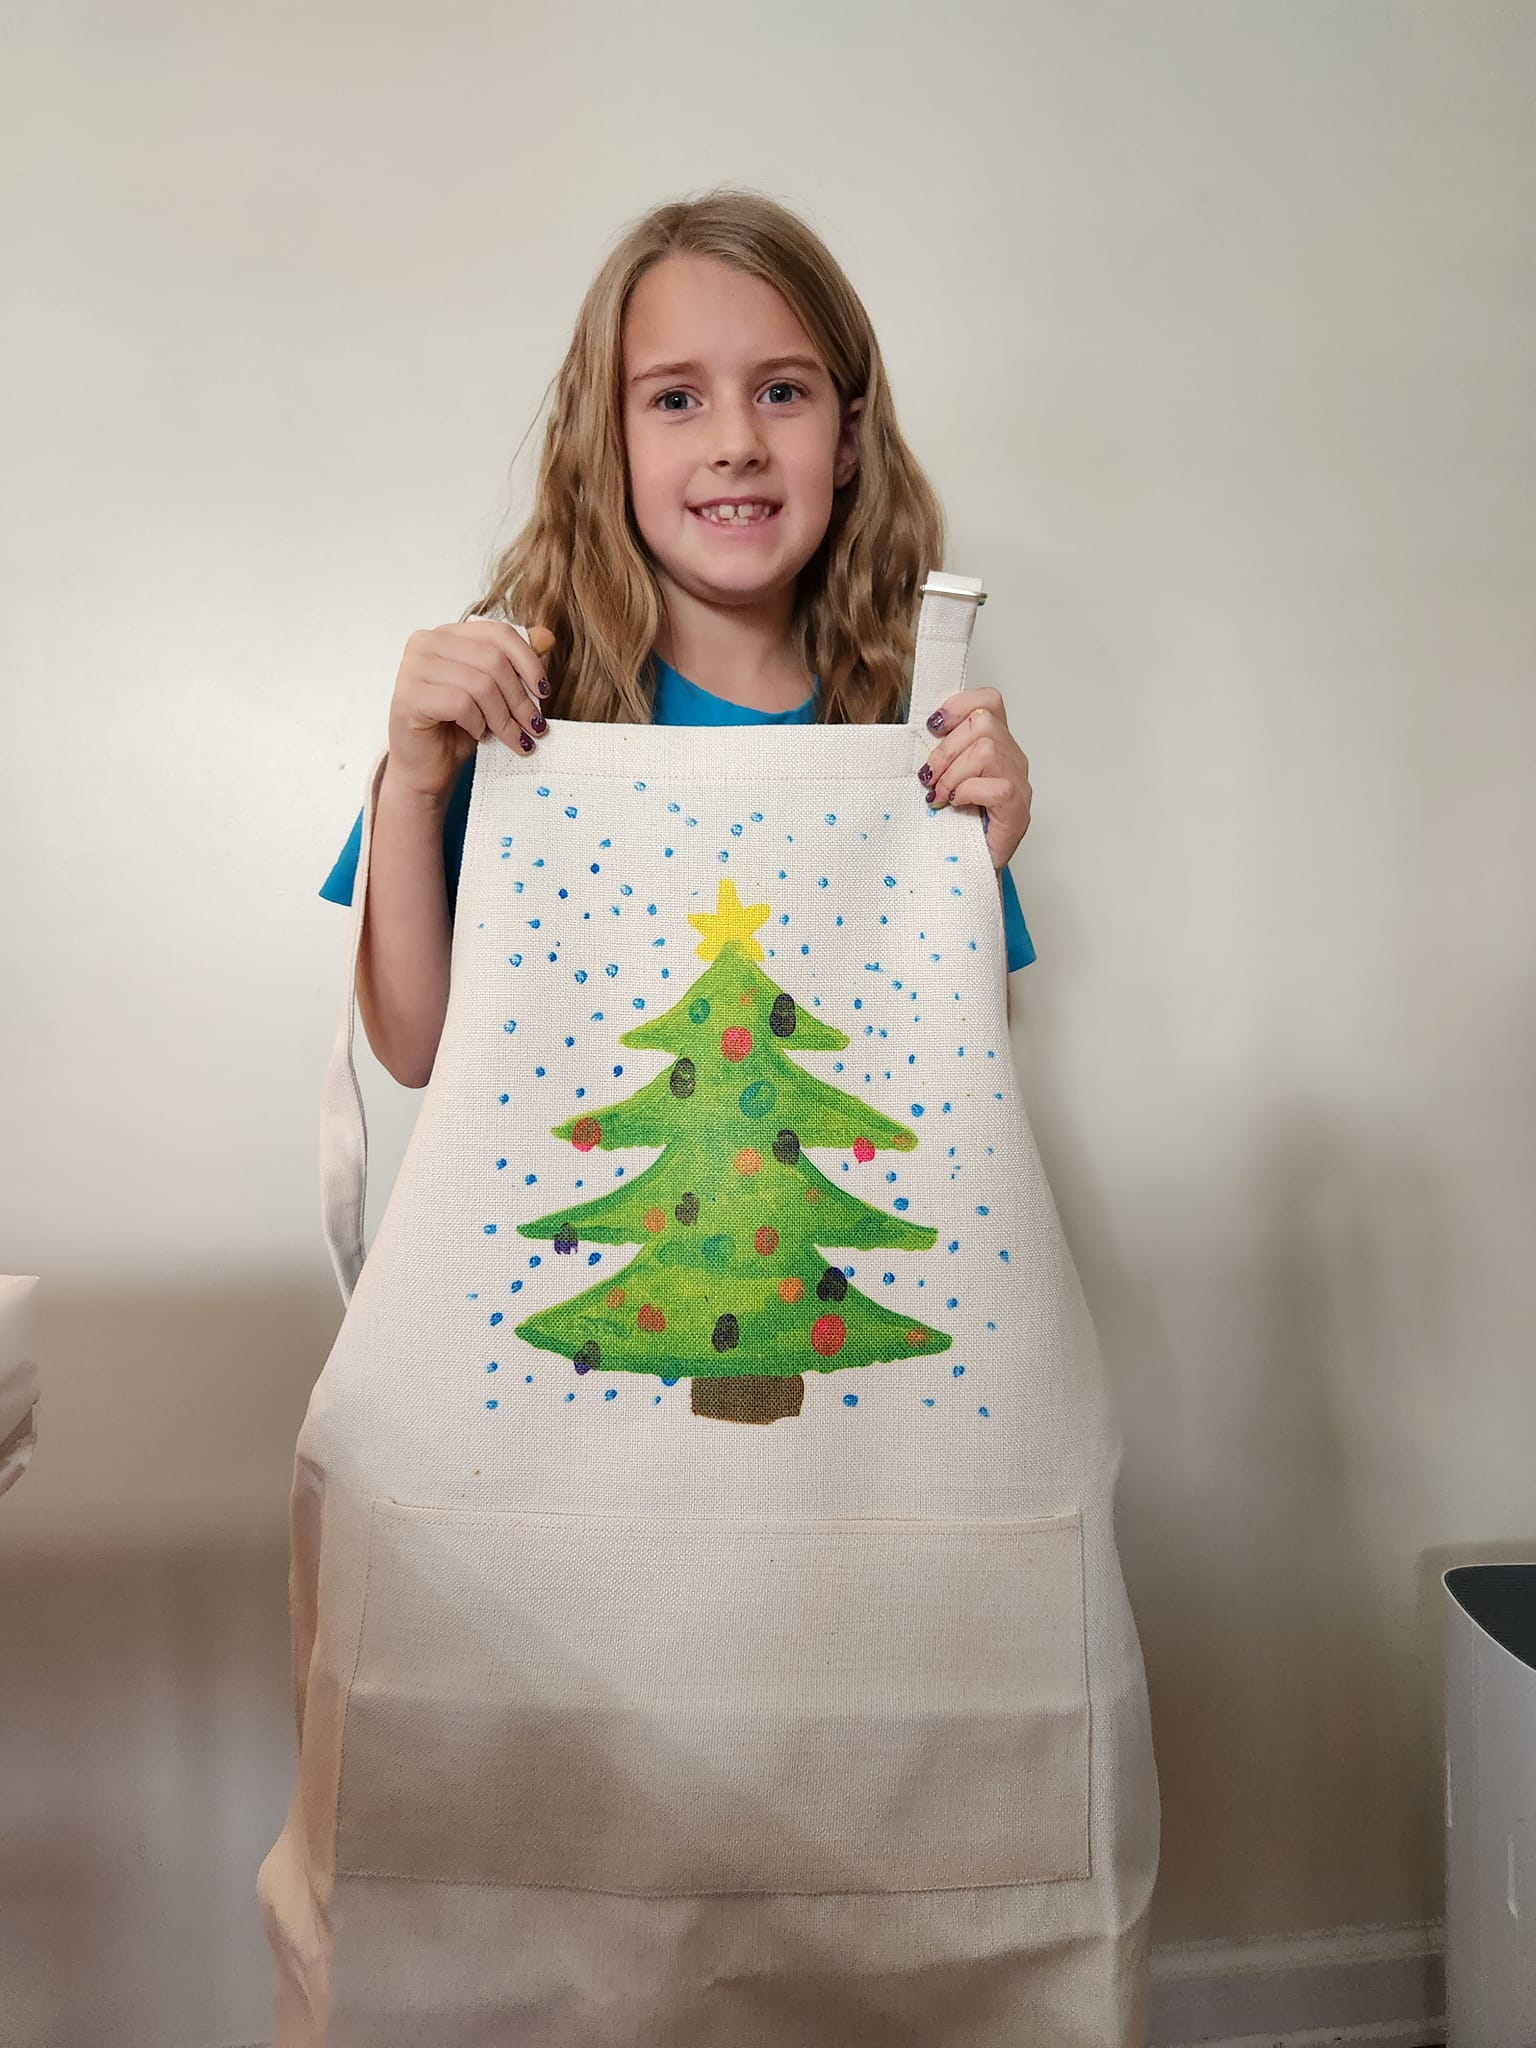 Who doesn't love a gift made by children? This apron was made using Artesprix sublimation paint